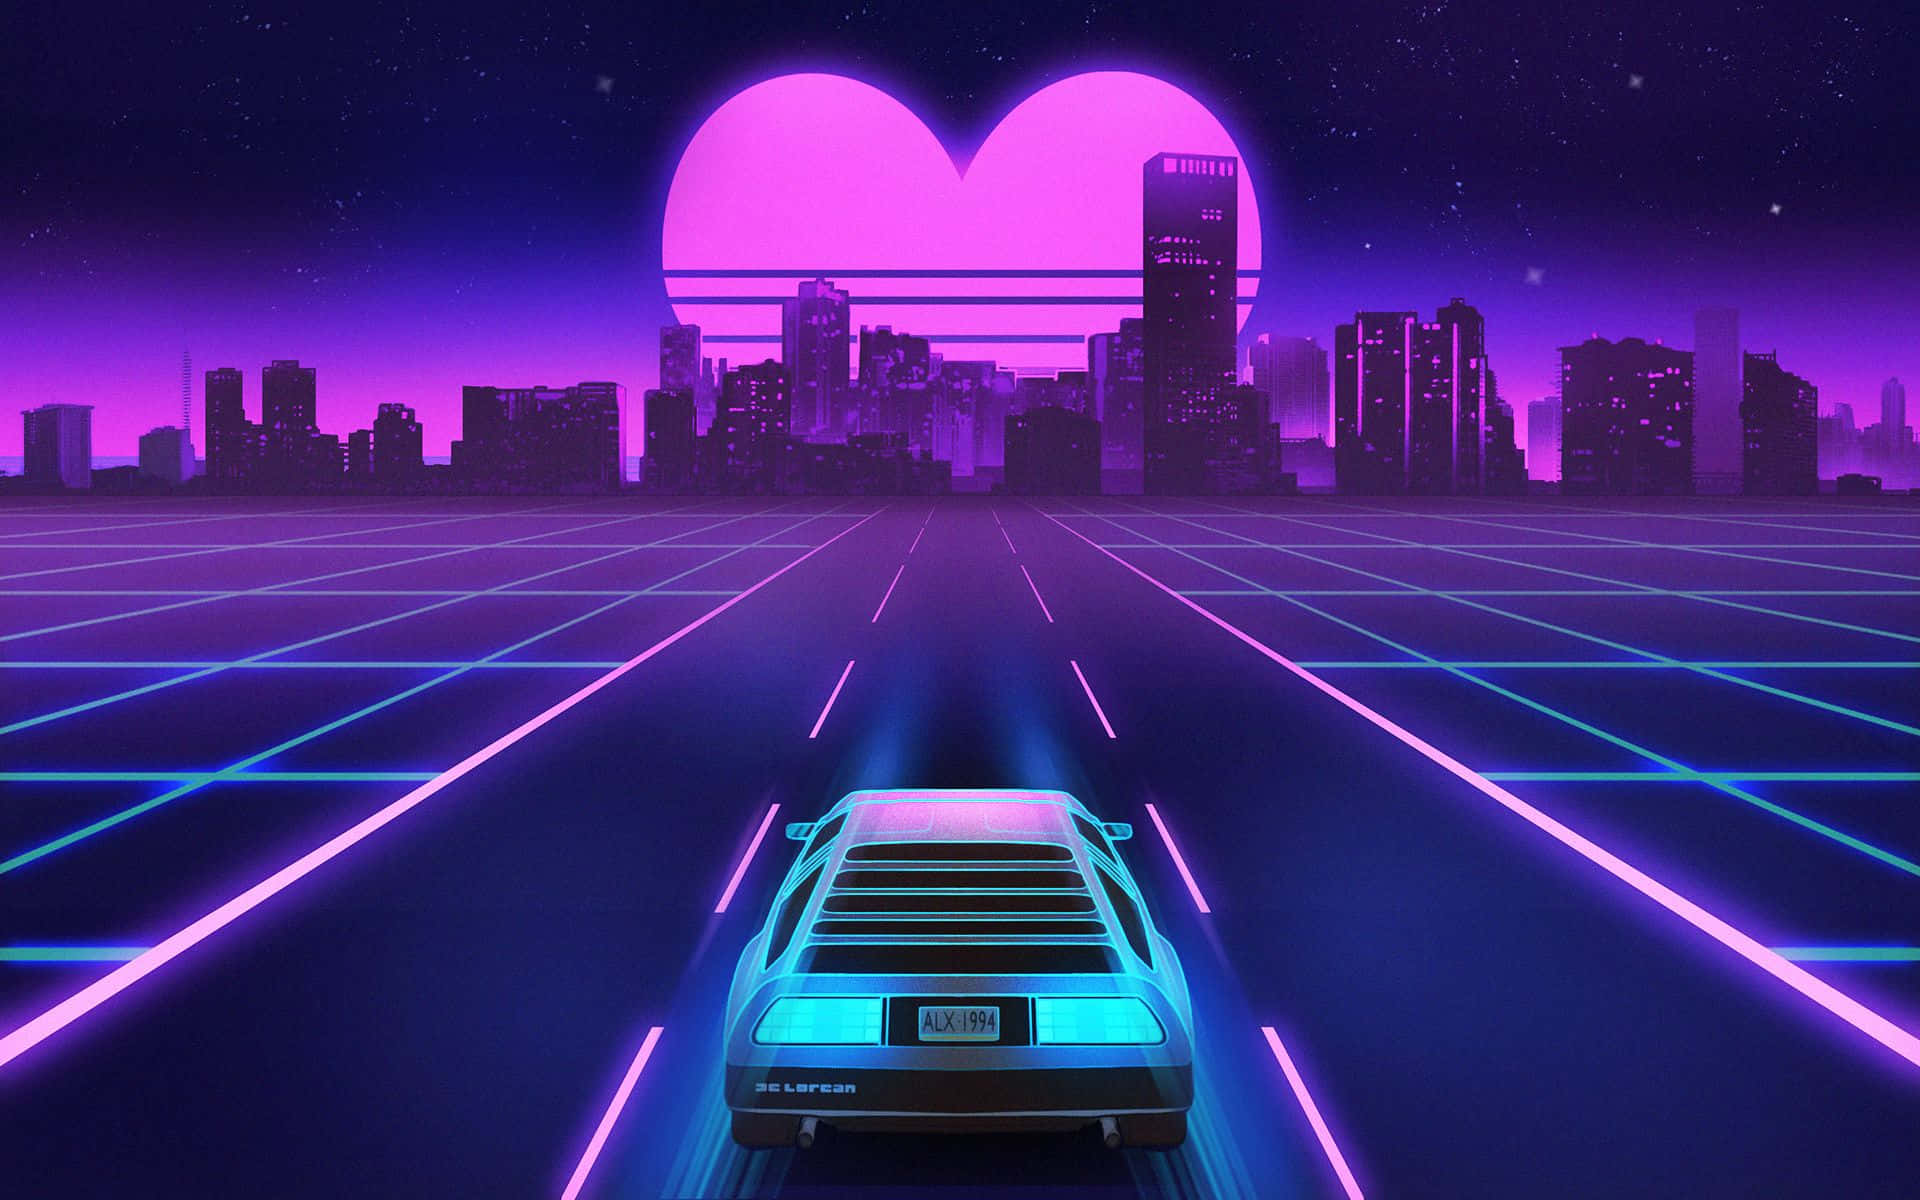 "Relax&reminisce with this 80s-inspired Vaporwave wallpaper." Wallpaper